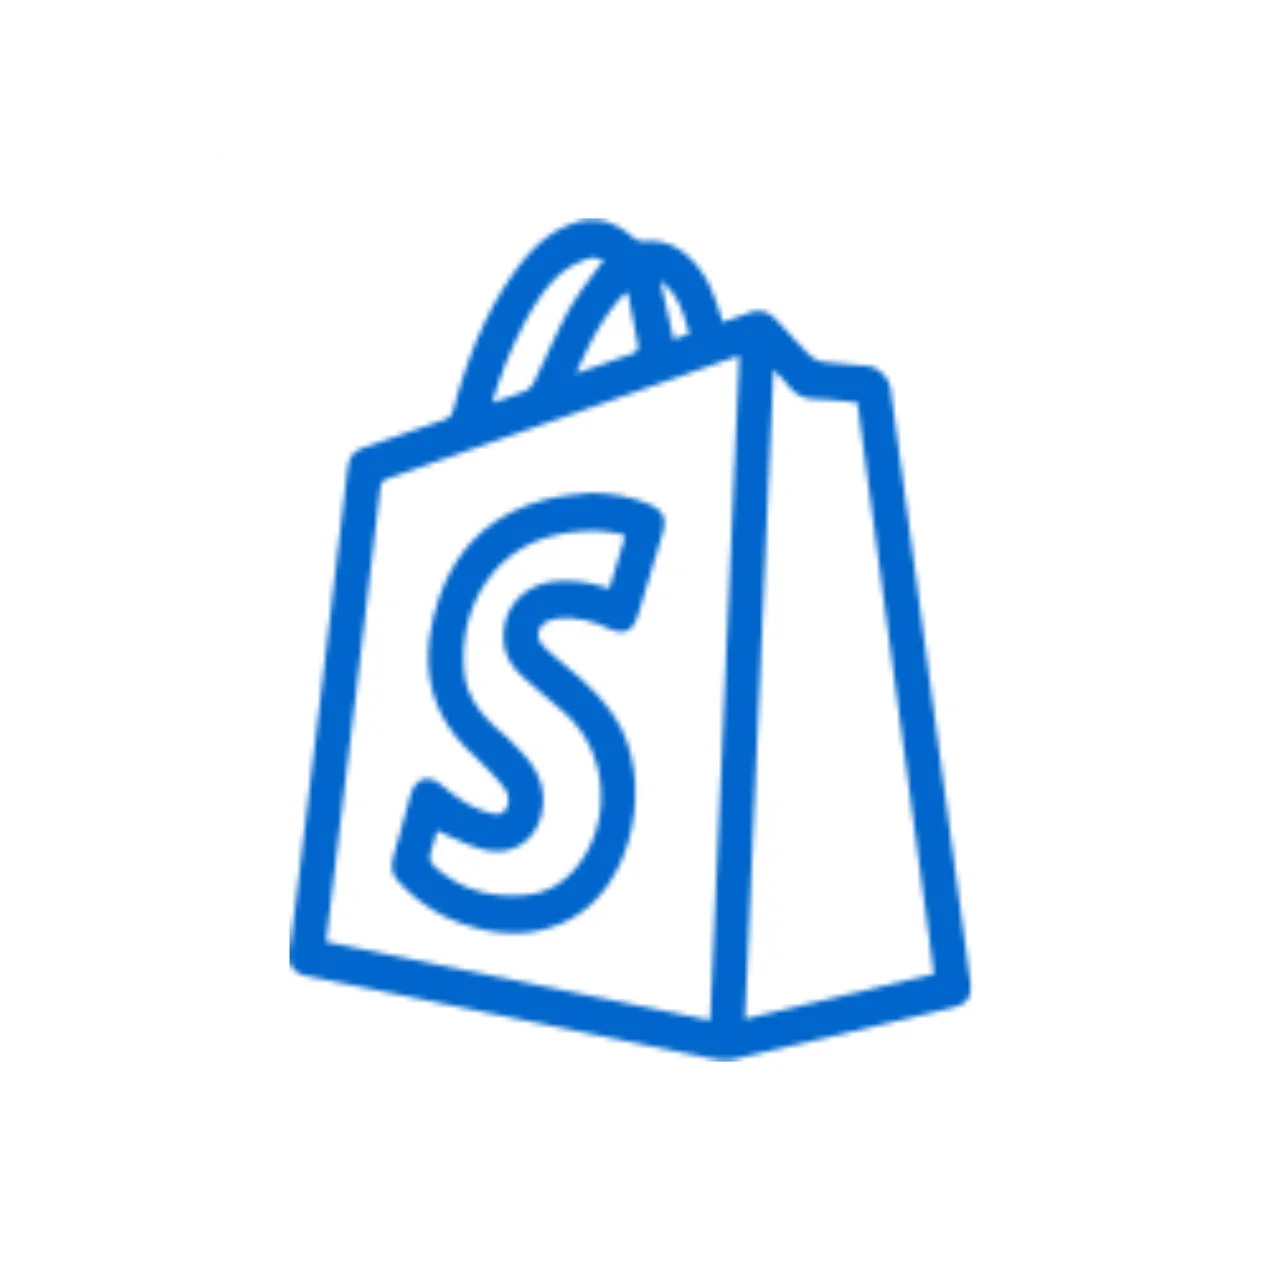 Implementation on Shopify